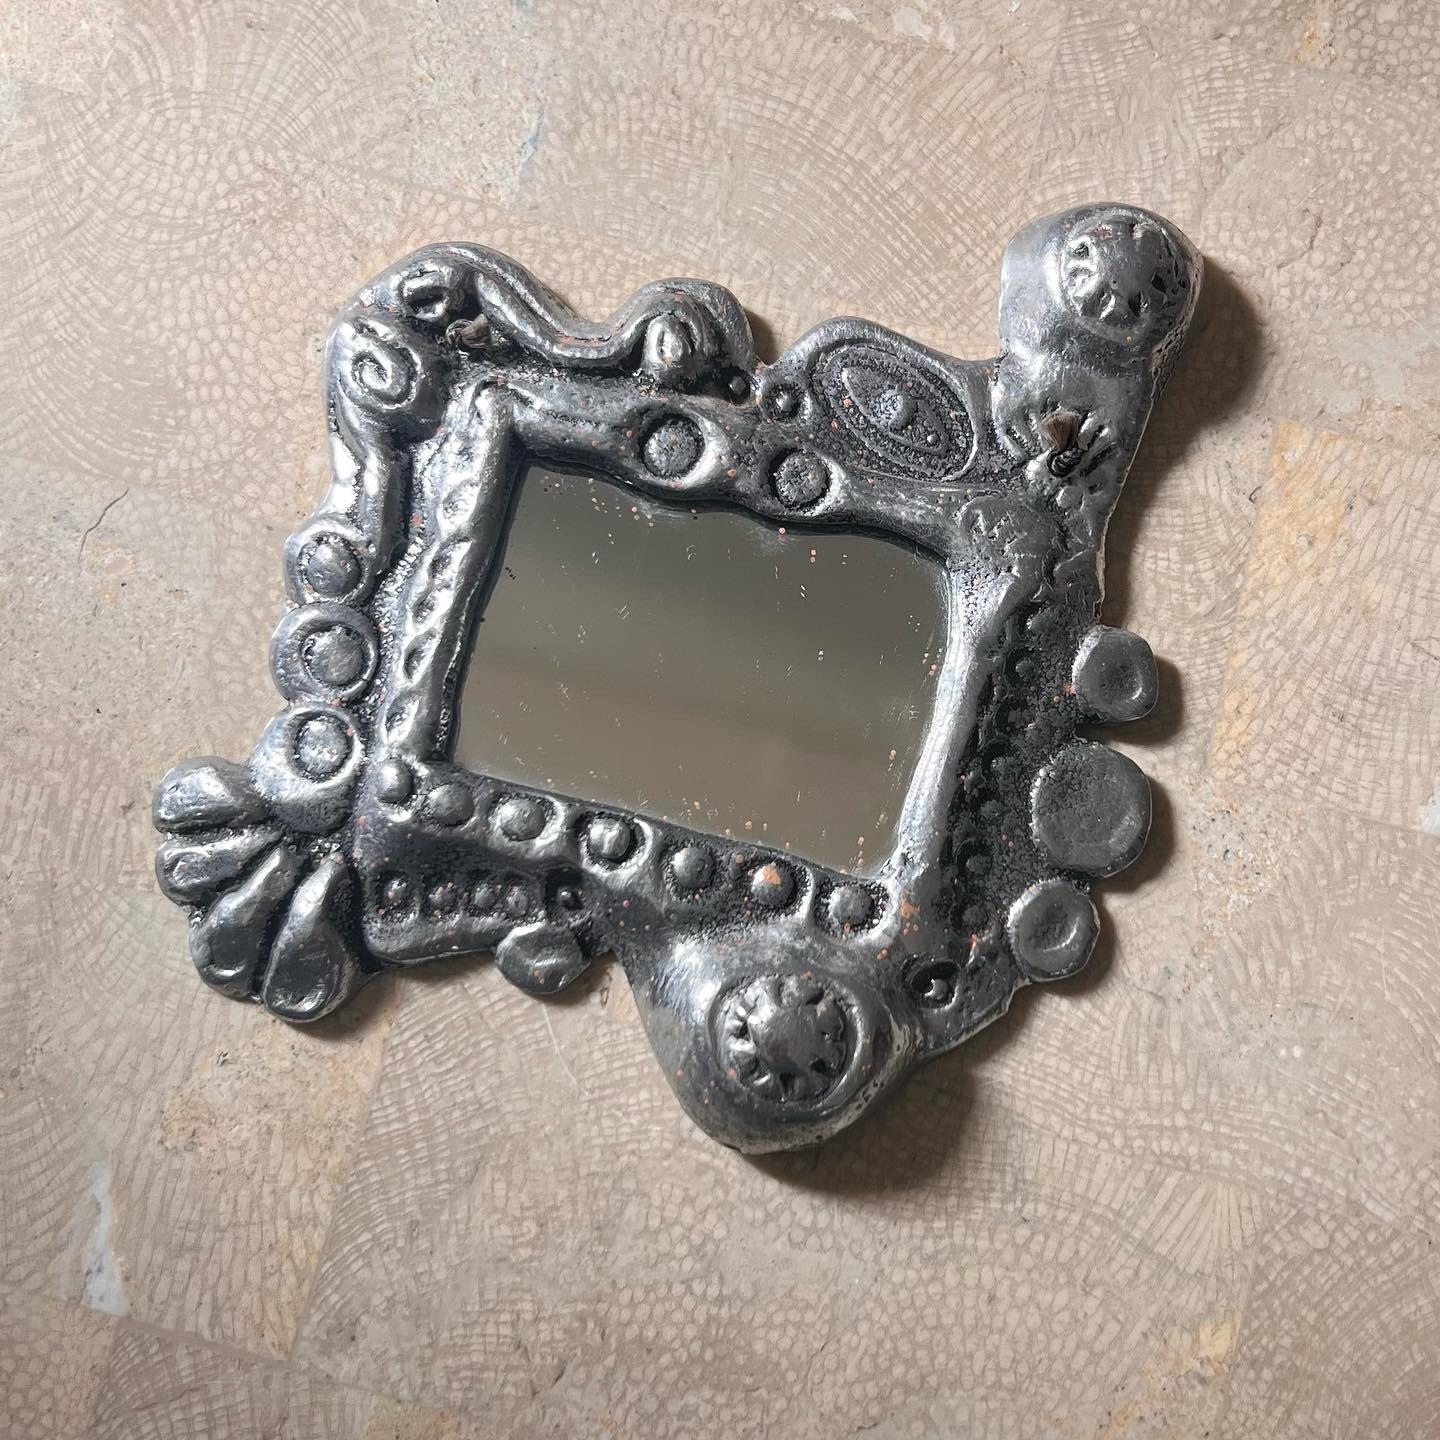 A small brutalist wall mirror by Donald Drumm, signed, 1979. Some tarnish but overall great condition. Ready to hang. Pick up in LA or we ship worldwide. 
5” x 5.25” 